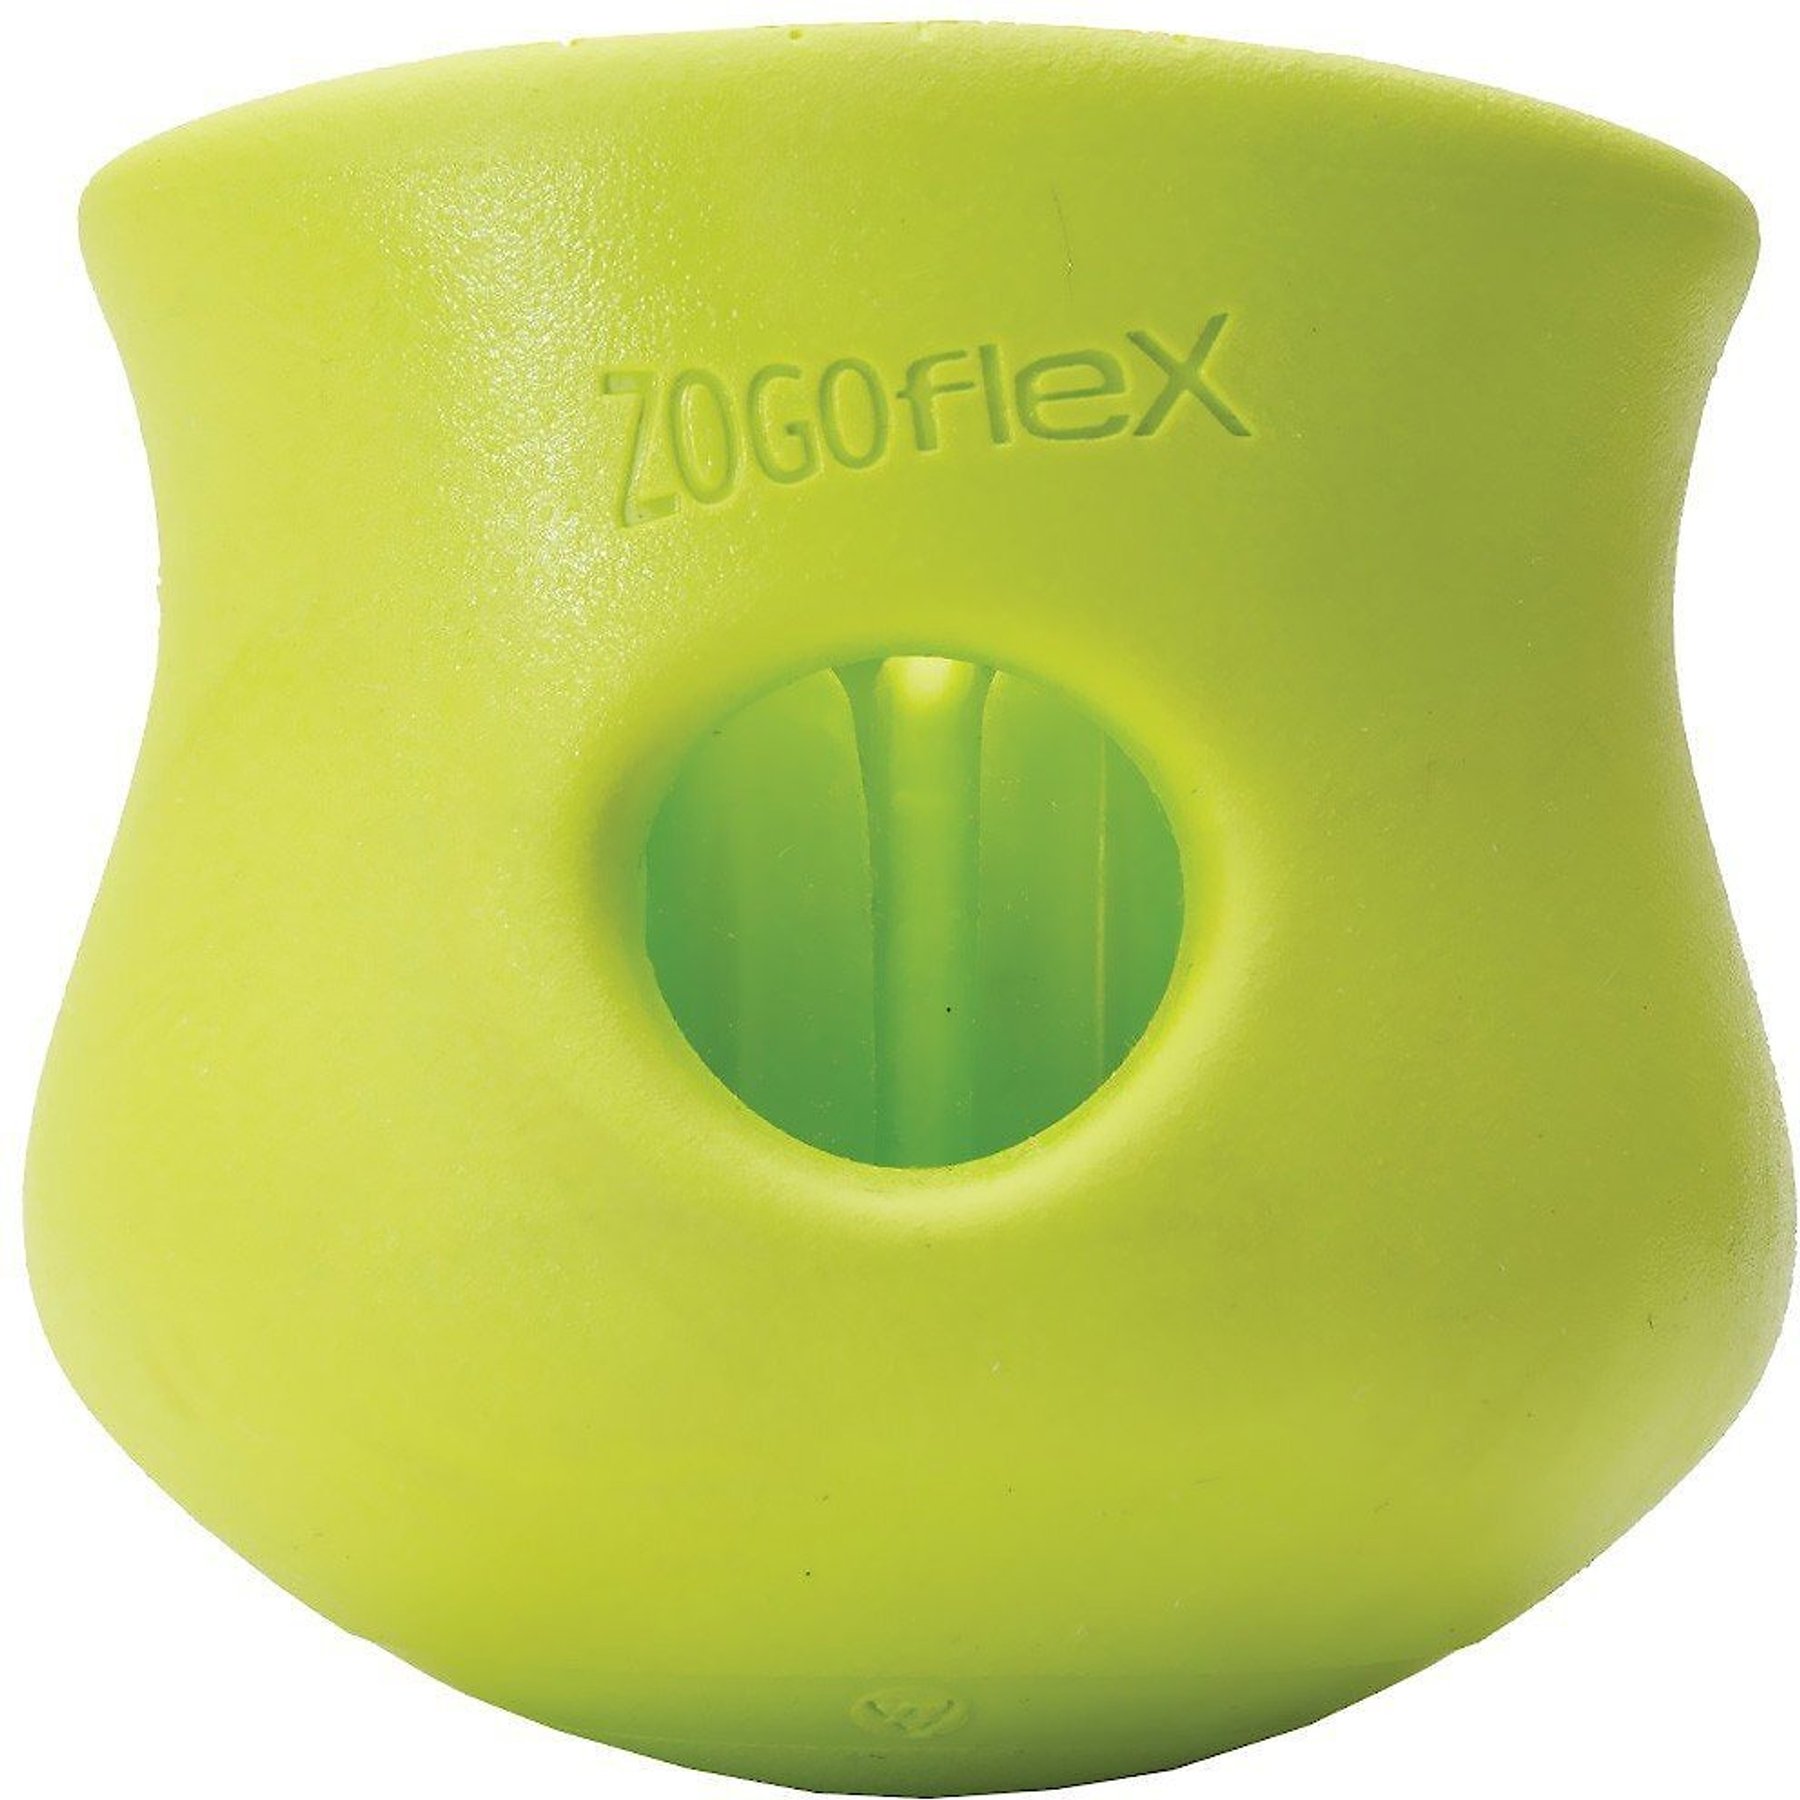 West Paw Toppl Stopper Dog Toy Accessory, Granny Smith